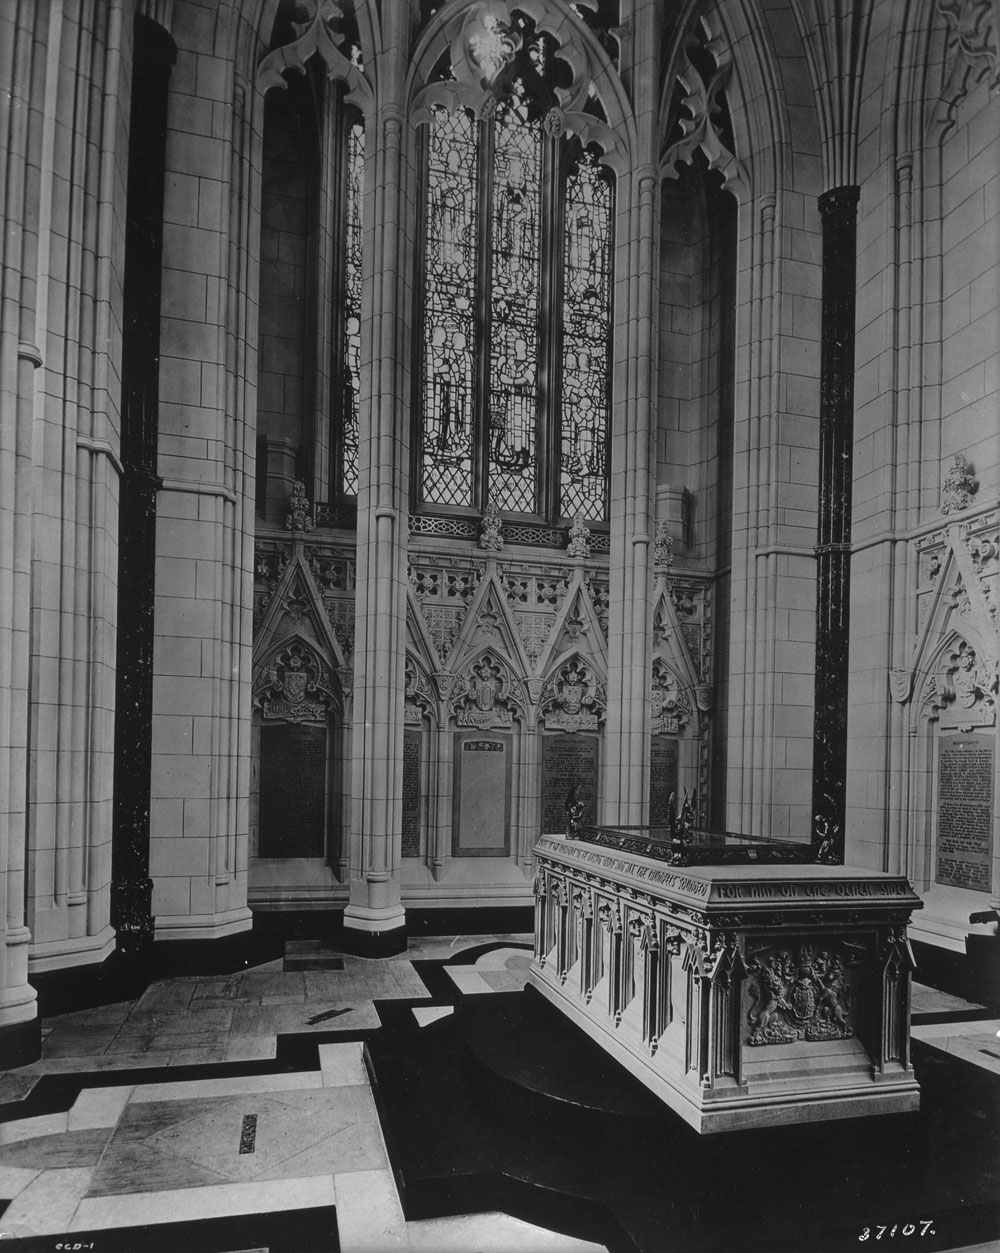 Stained glass window inside Memorial chamber, 1932.